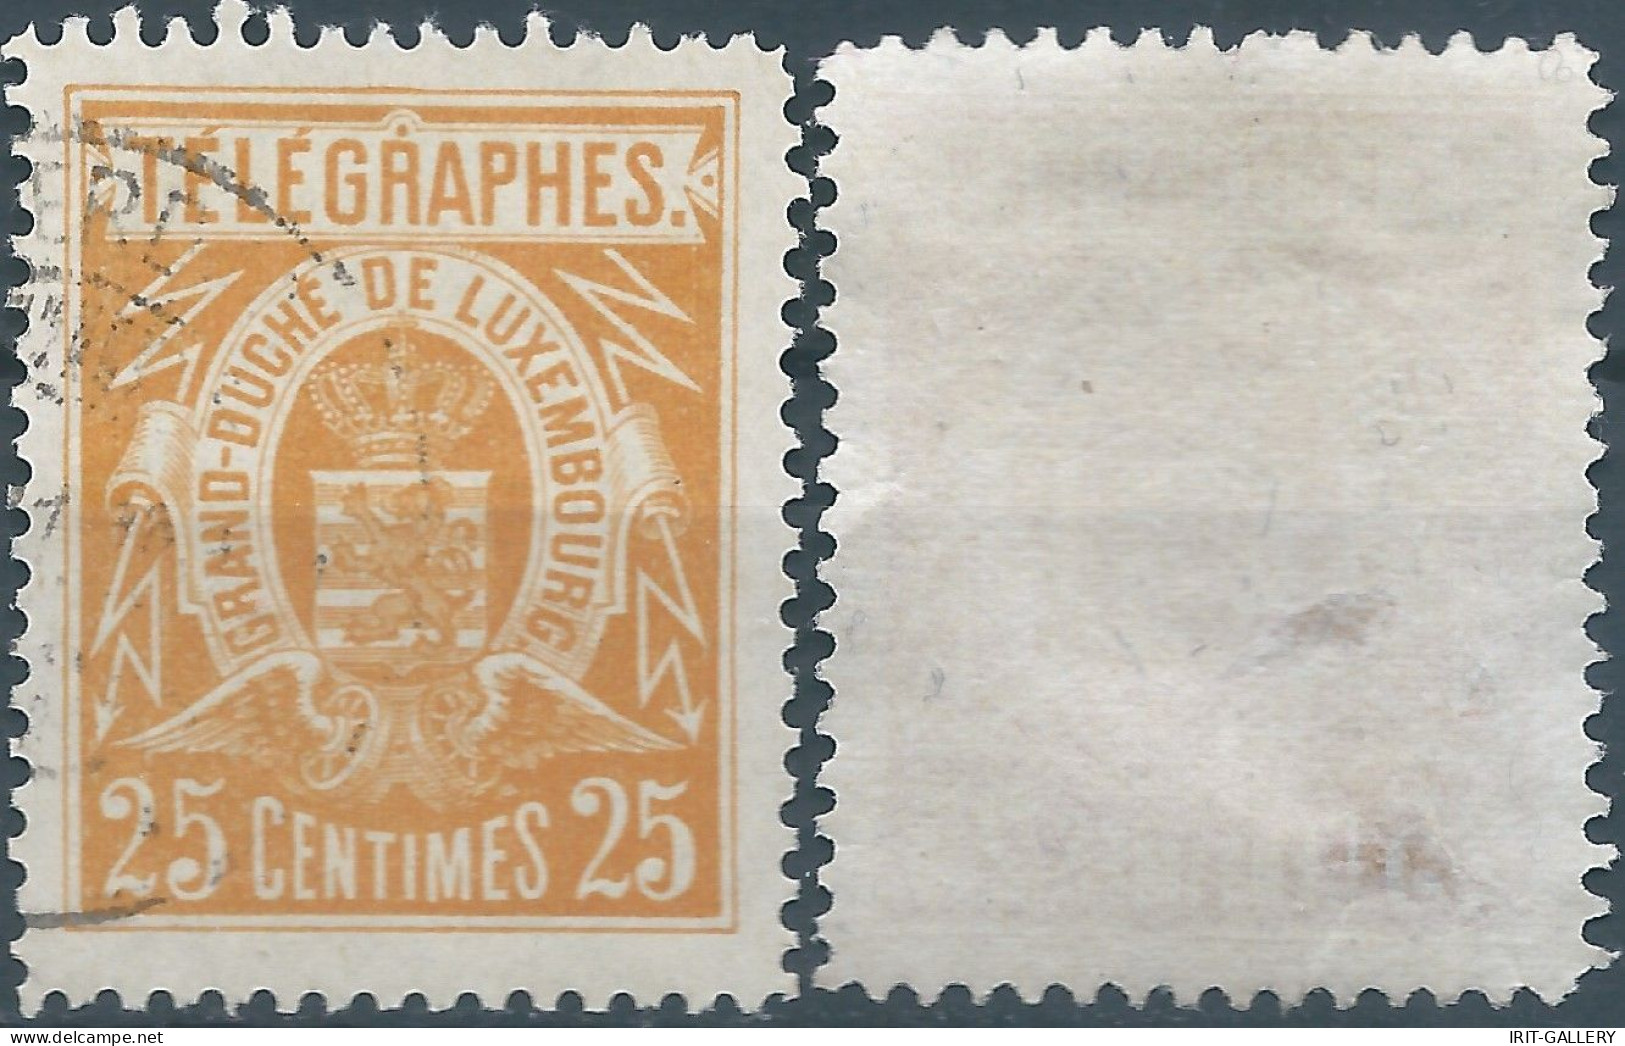 Lussemburgo - Luxembourg -TELEGRAPHES 1883 Telegraph Stamps,25C,Used & Not Cancelled, Mint - Telegraphenmarken